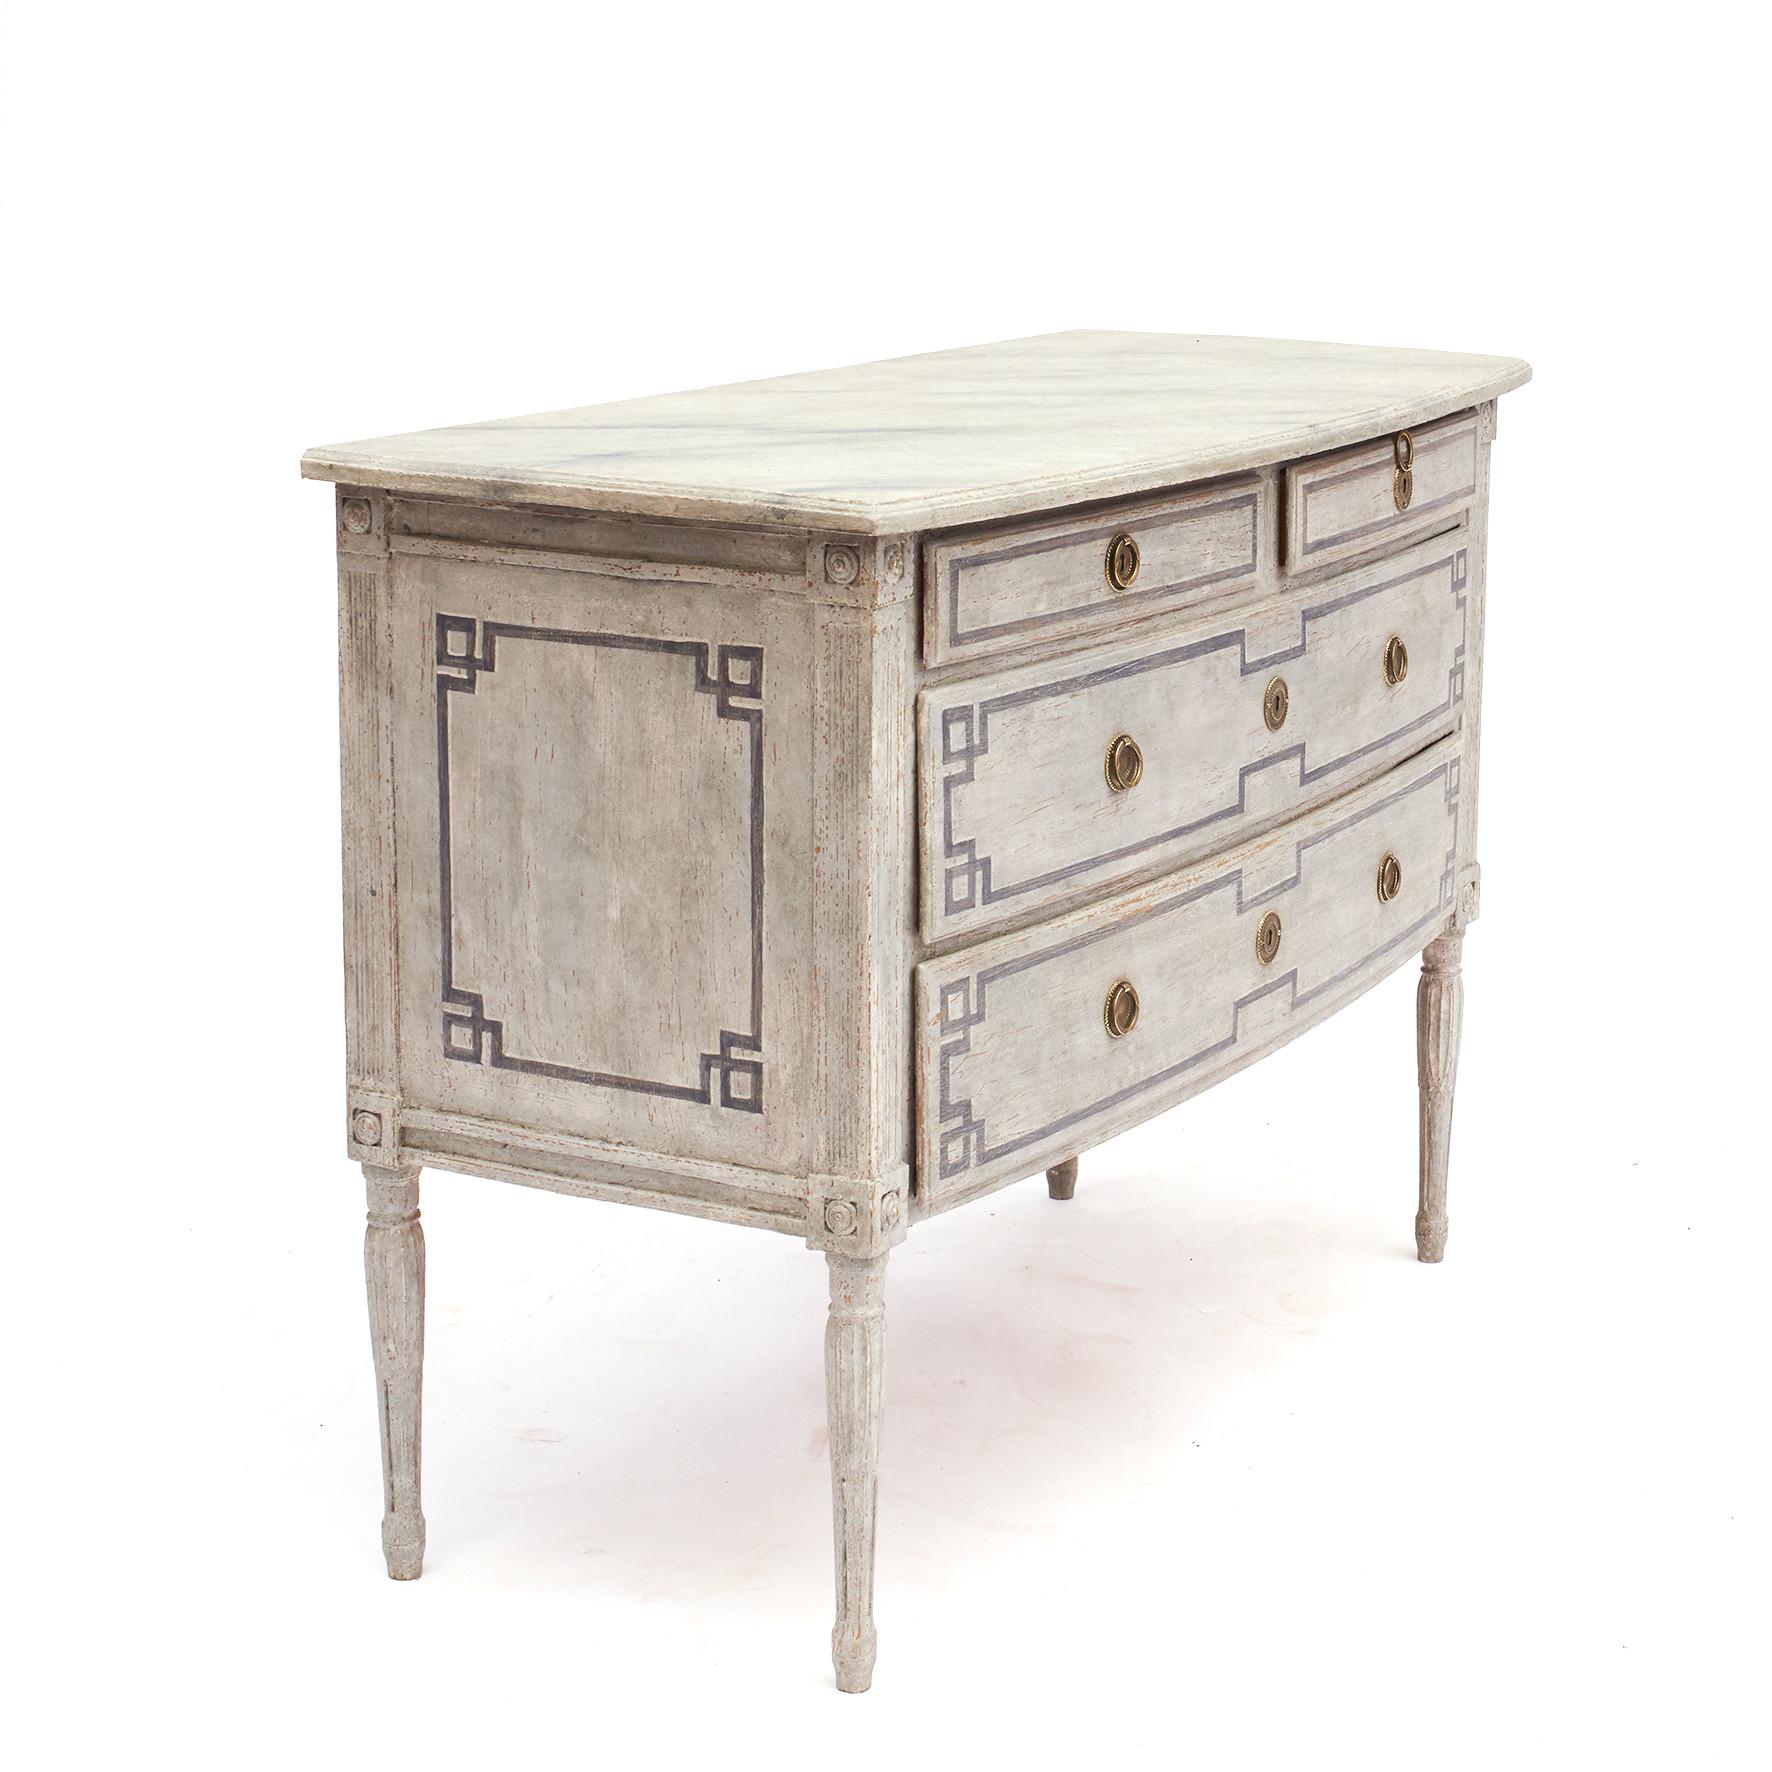 Swedish Gustavian style chest of drawers painted in blue shades.
Features a rectangular blue-grey marbleized wooden top above a curved front. Four drawer flanked with side posts showcasing fluted motifs, resting on four turned fluted legs.
A